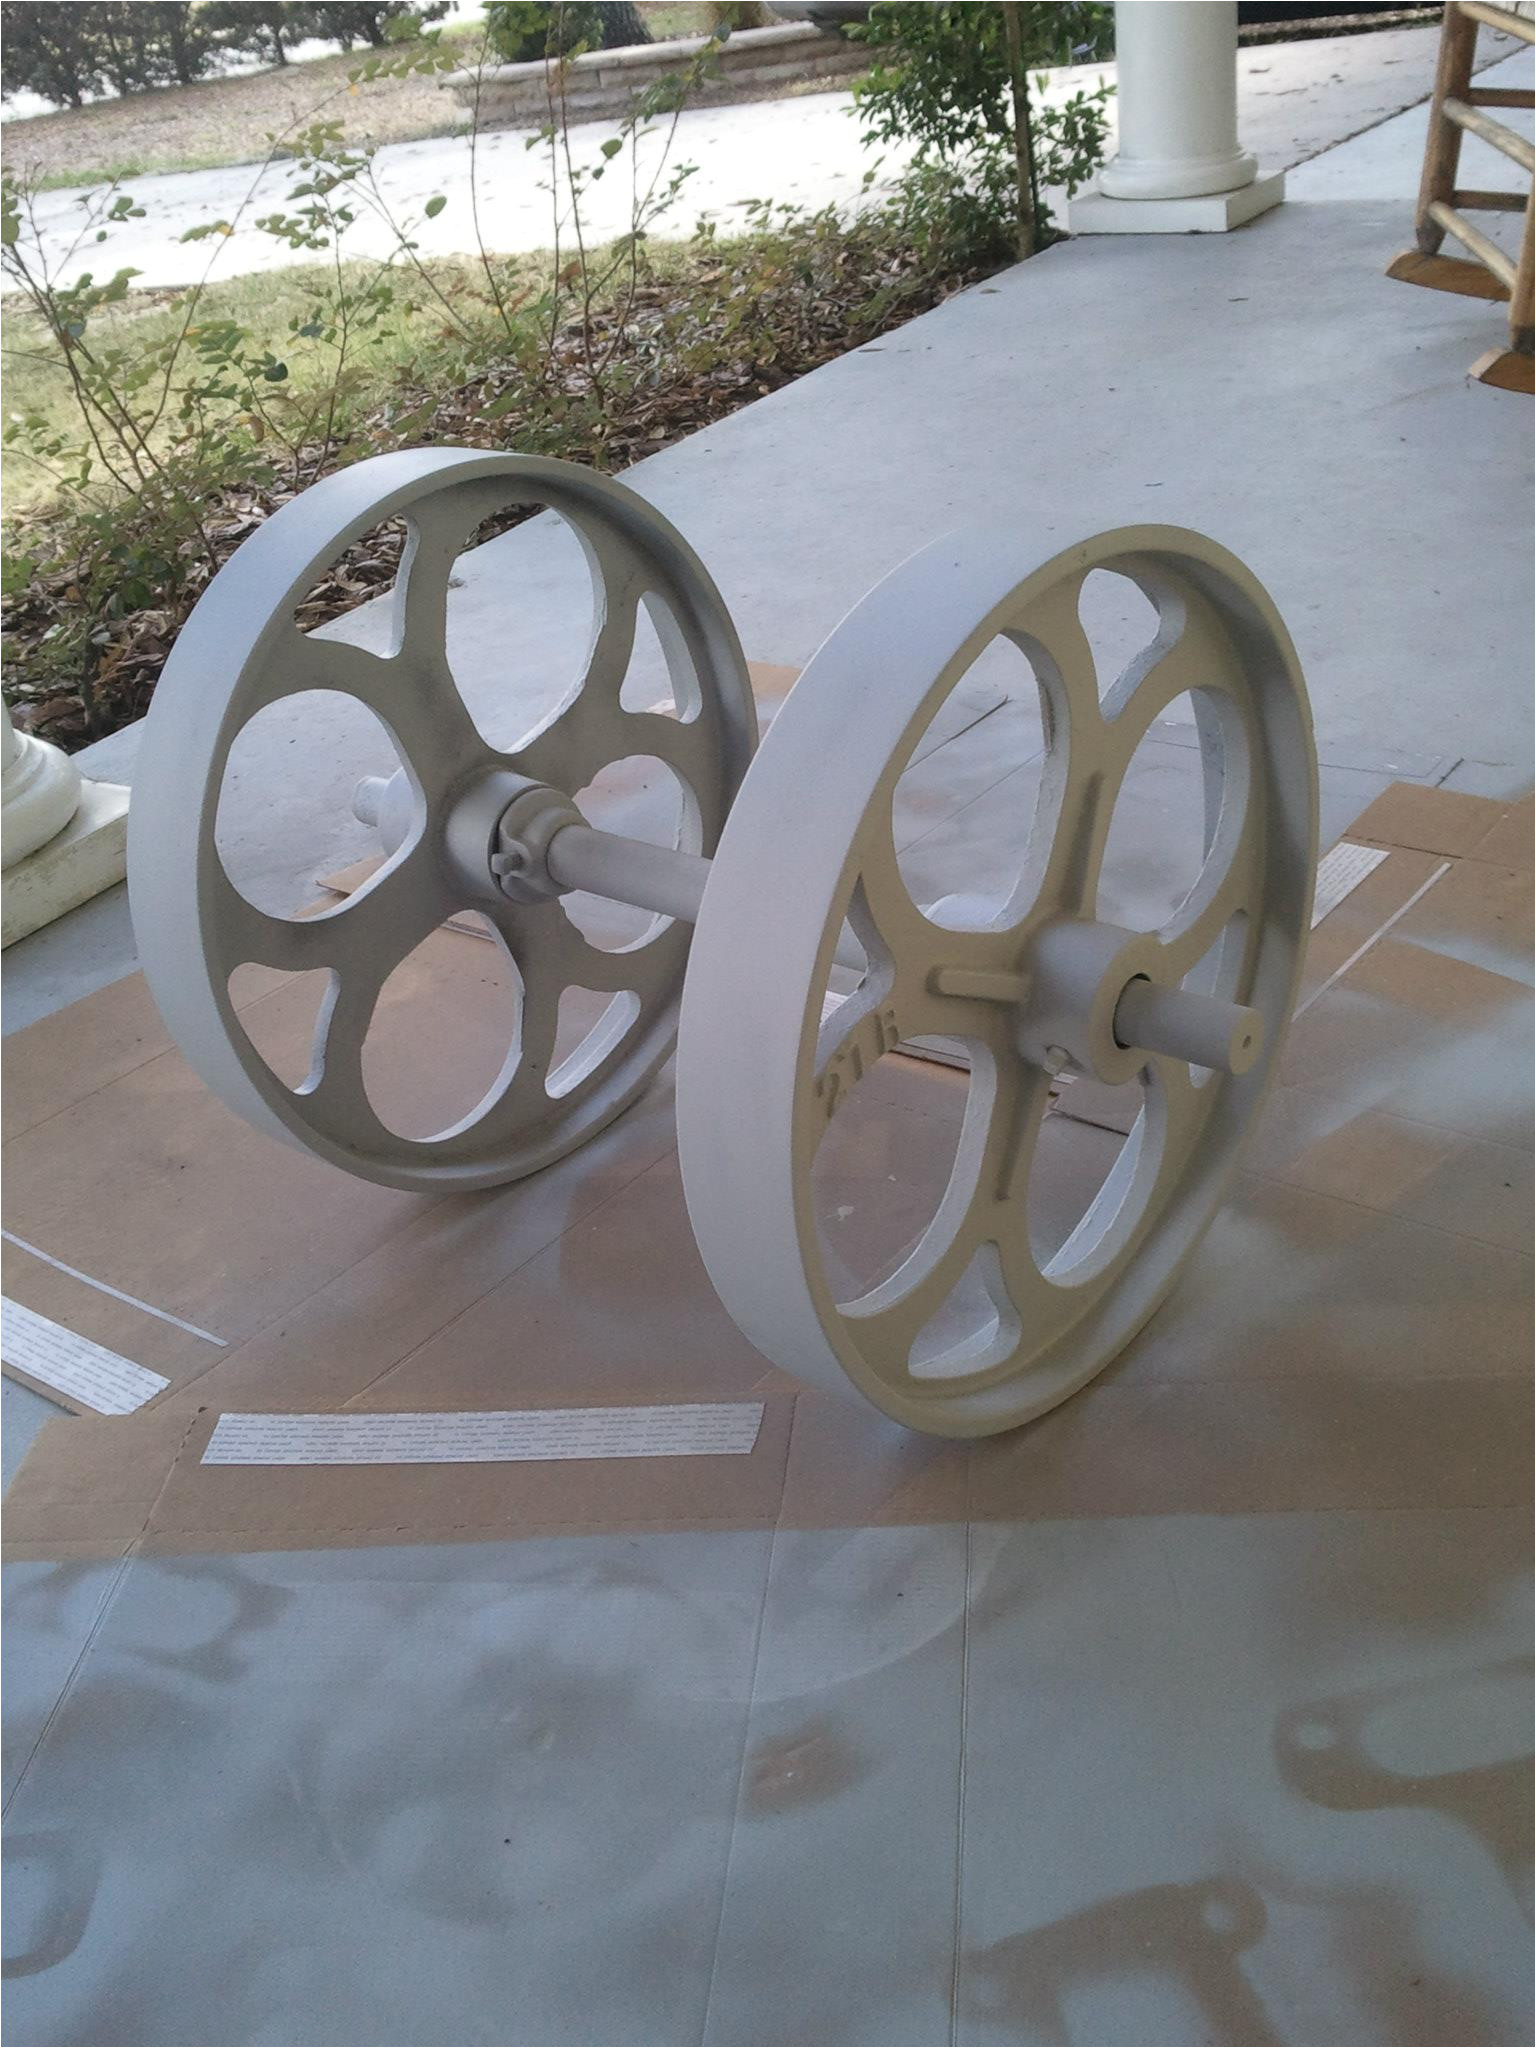 the big wheel fully primed after drying it will be ready for final painting